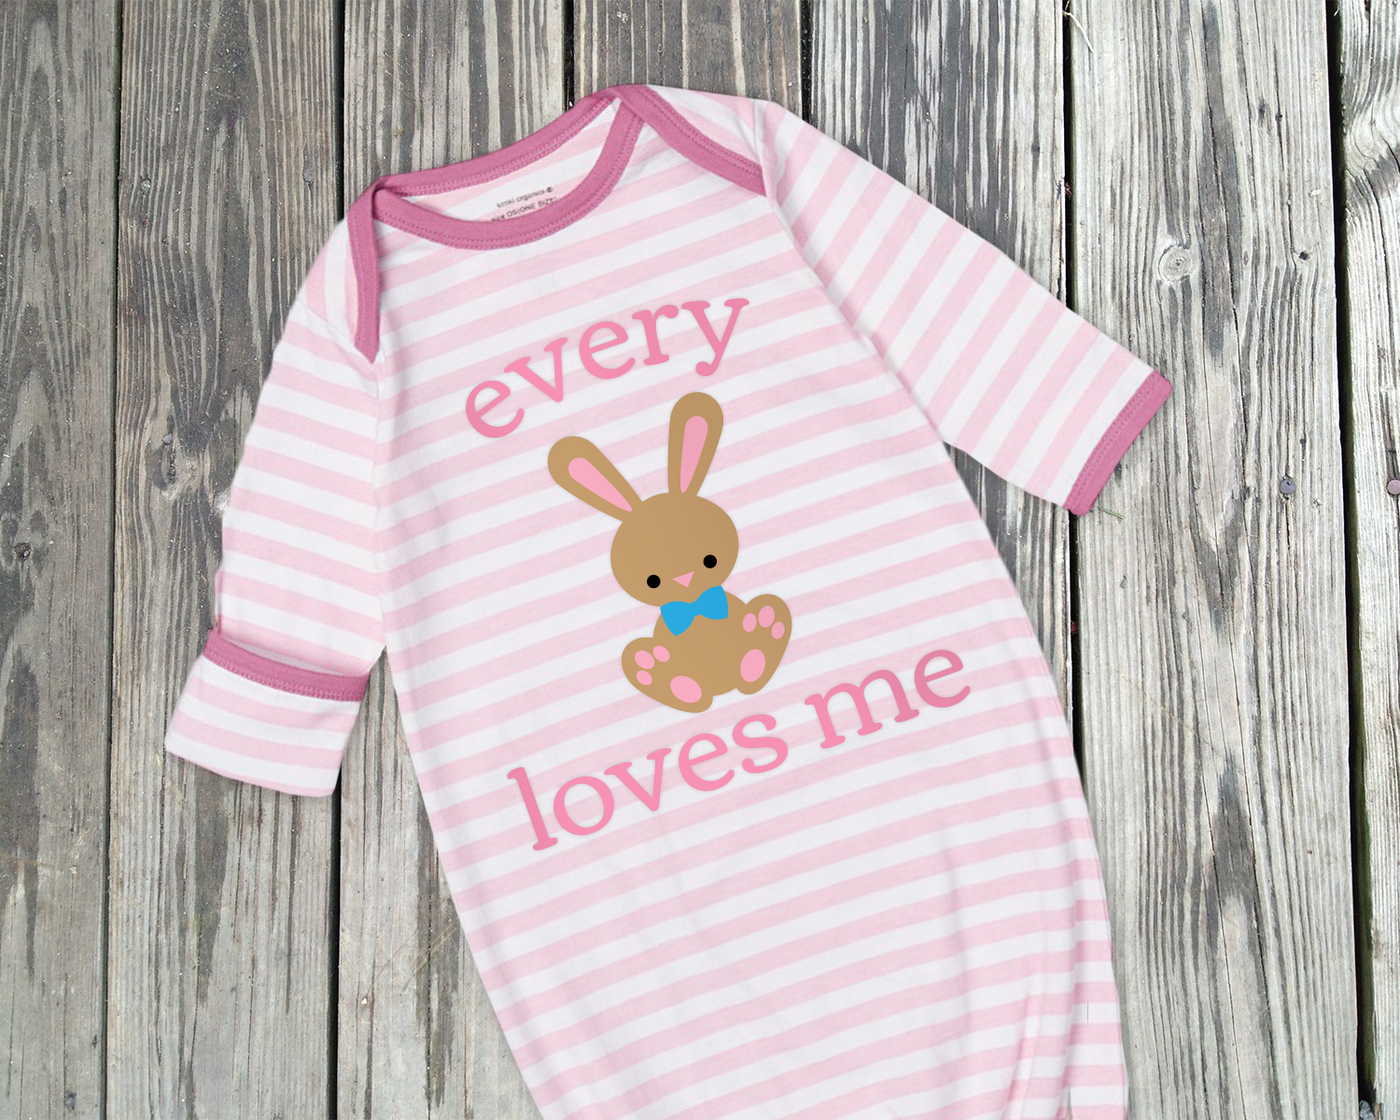 A pink an white striped baby sleep gown with a bunny wearing a bow tie. Around the bunny are the words "every" and "loves me" to complete the phrase "every [bunny] loves me"